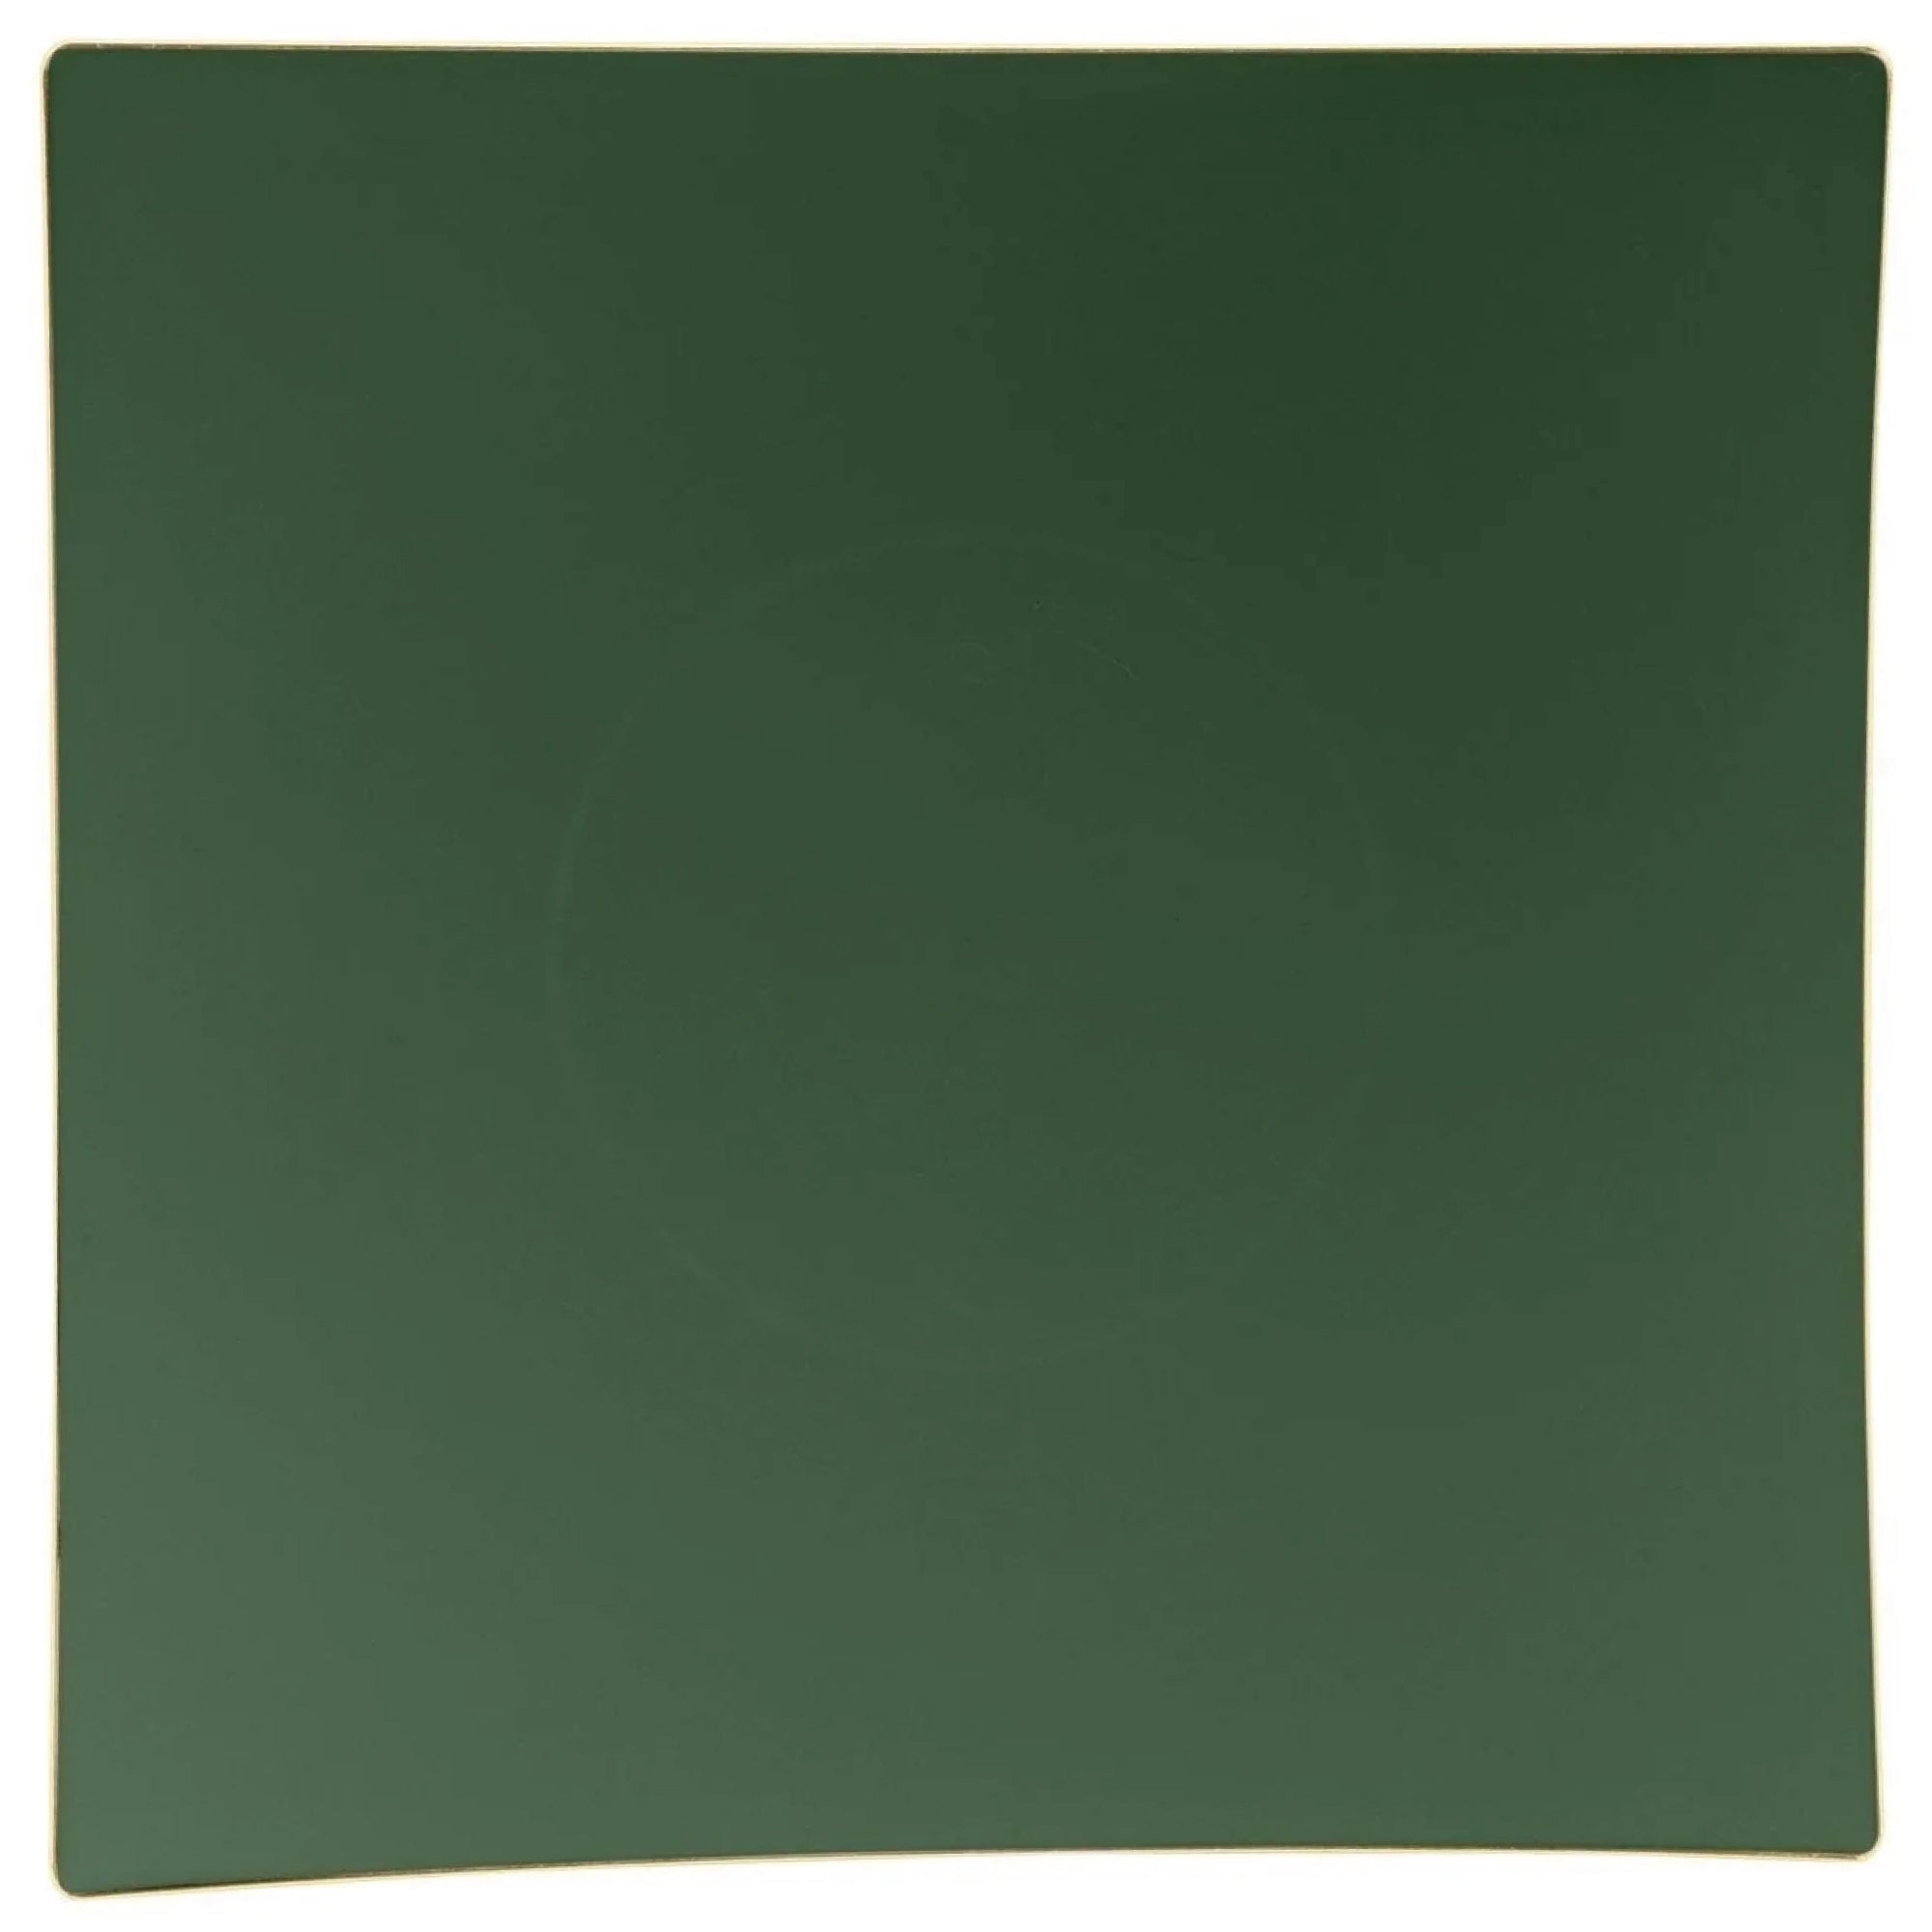 Emerald & Gold Square Plastic Dinner Plates 10ct | The Party Darling